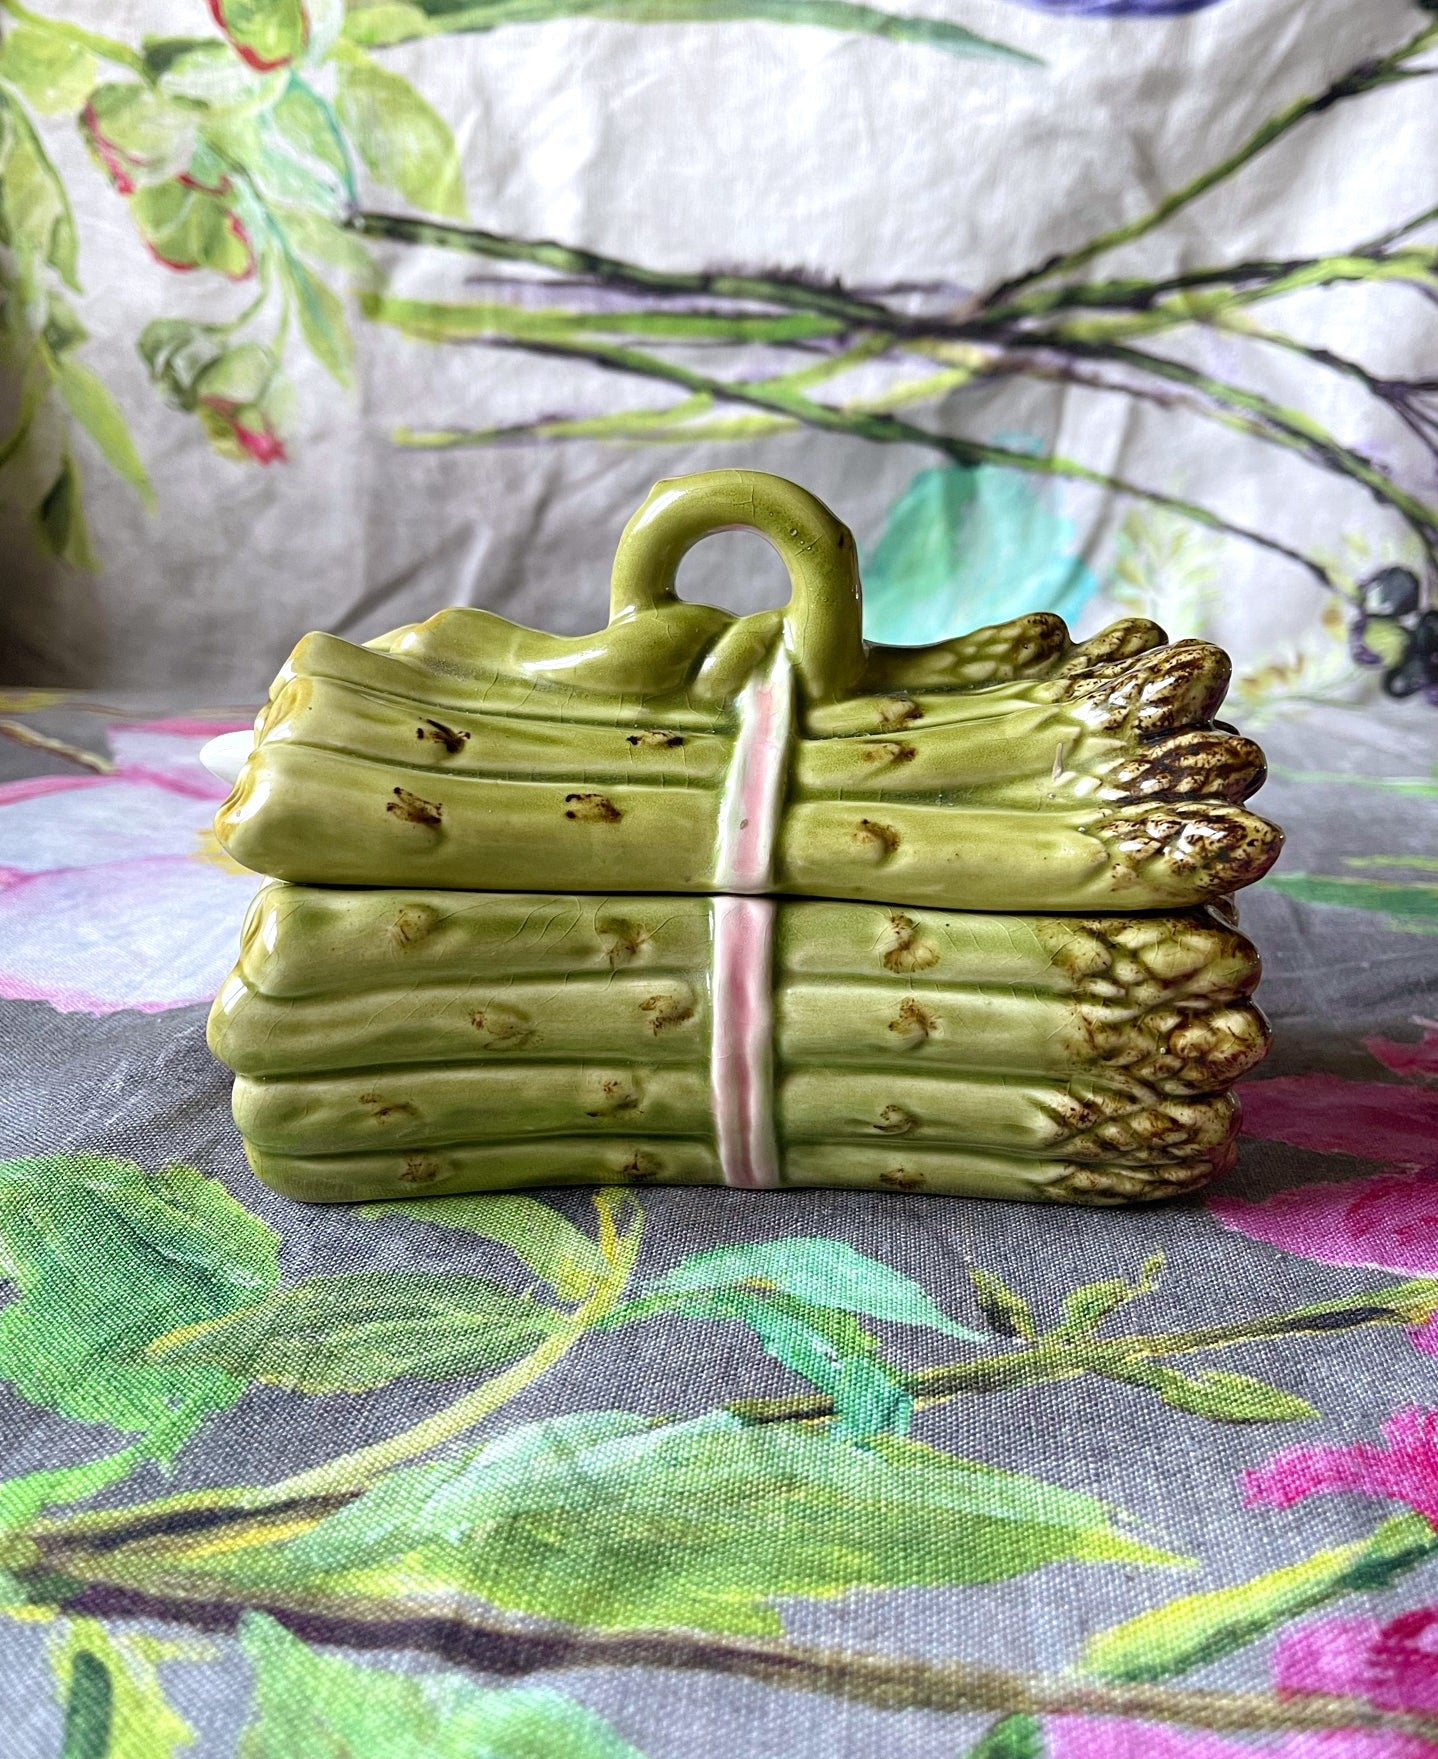 Vintage Majolica Asparagus Dish with Lid & Spoon